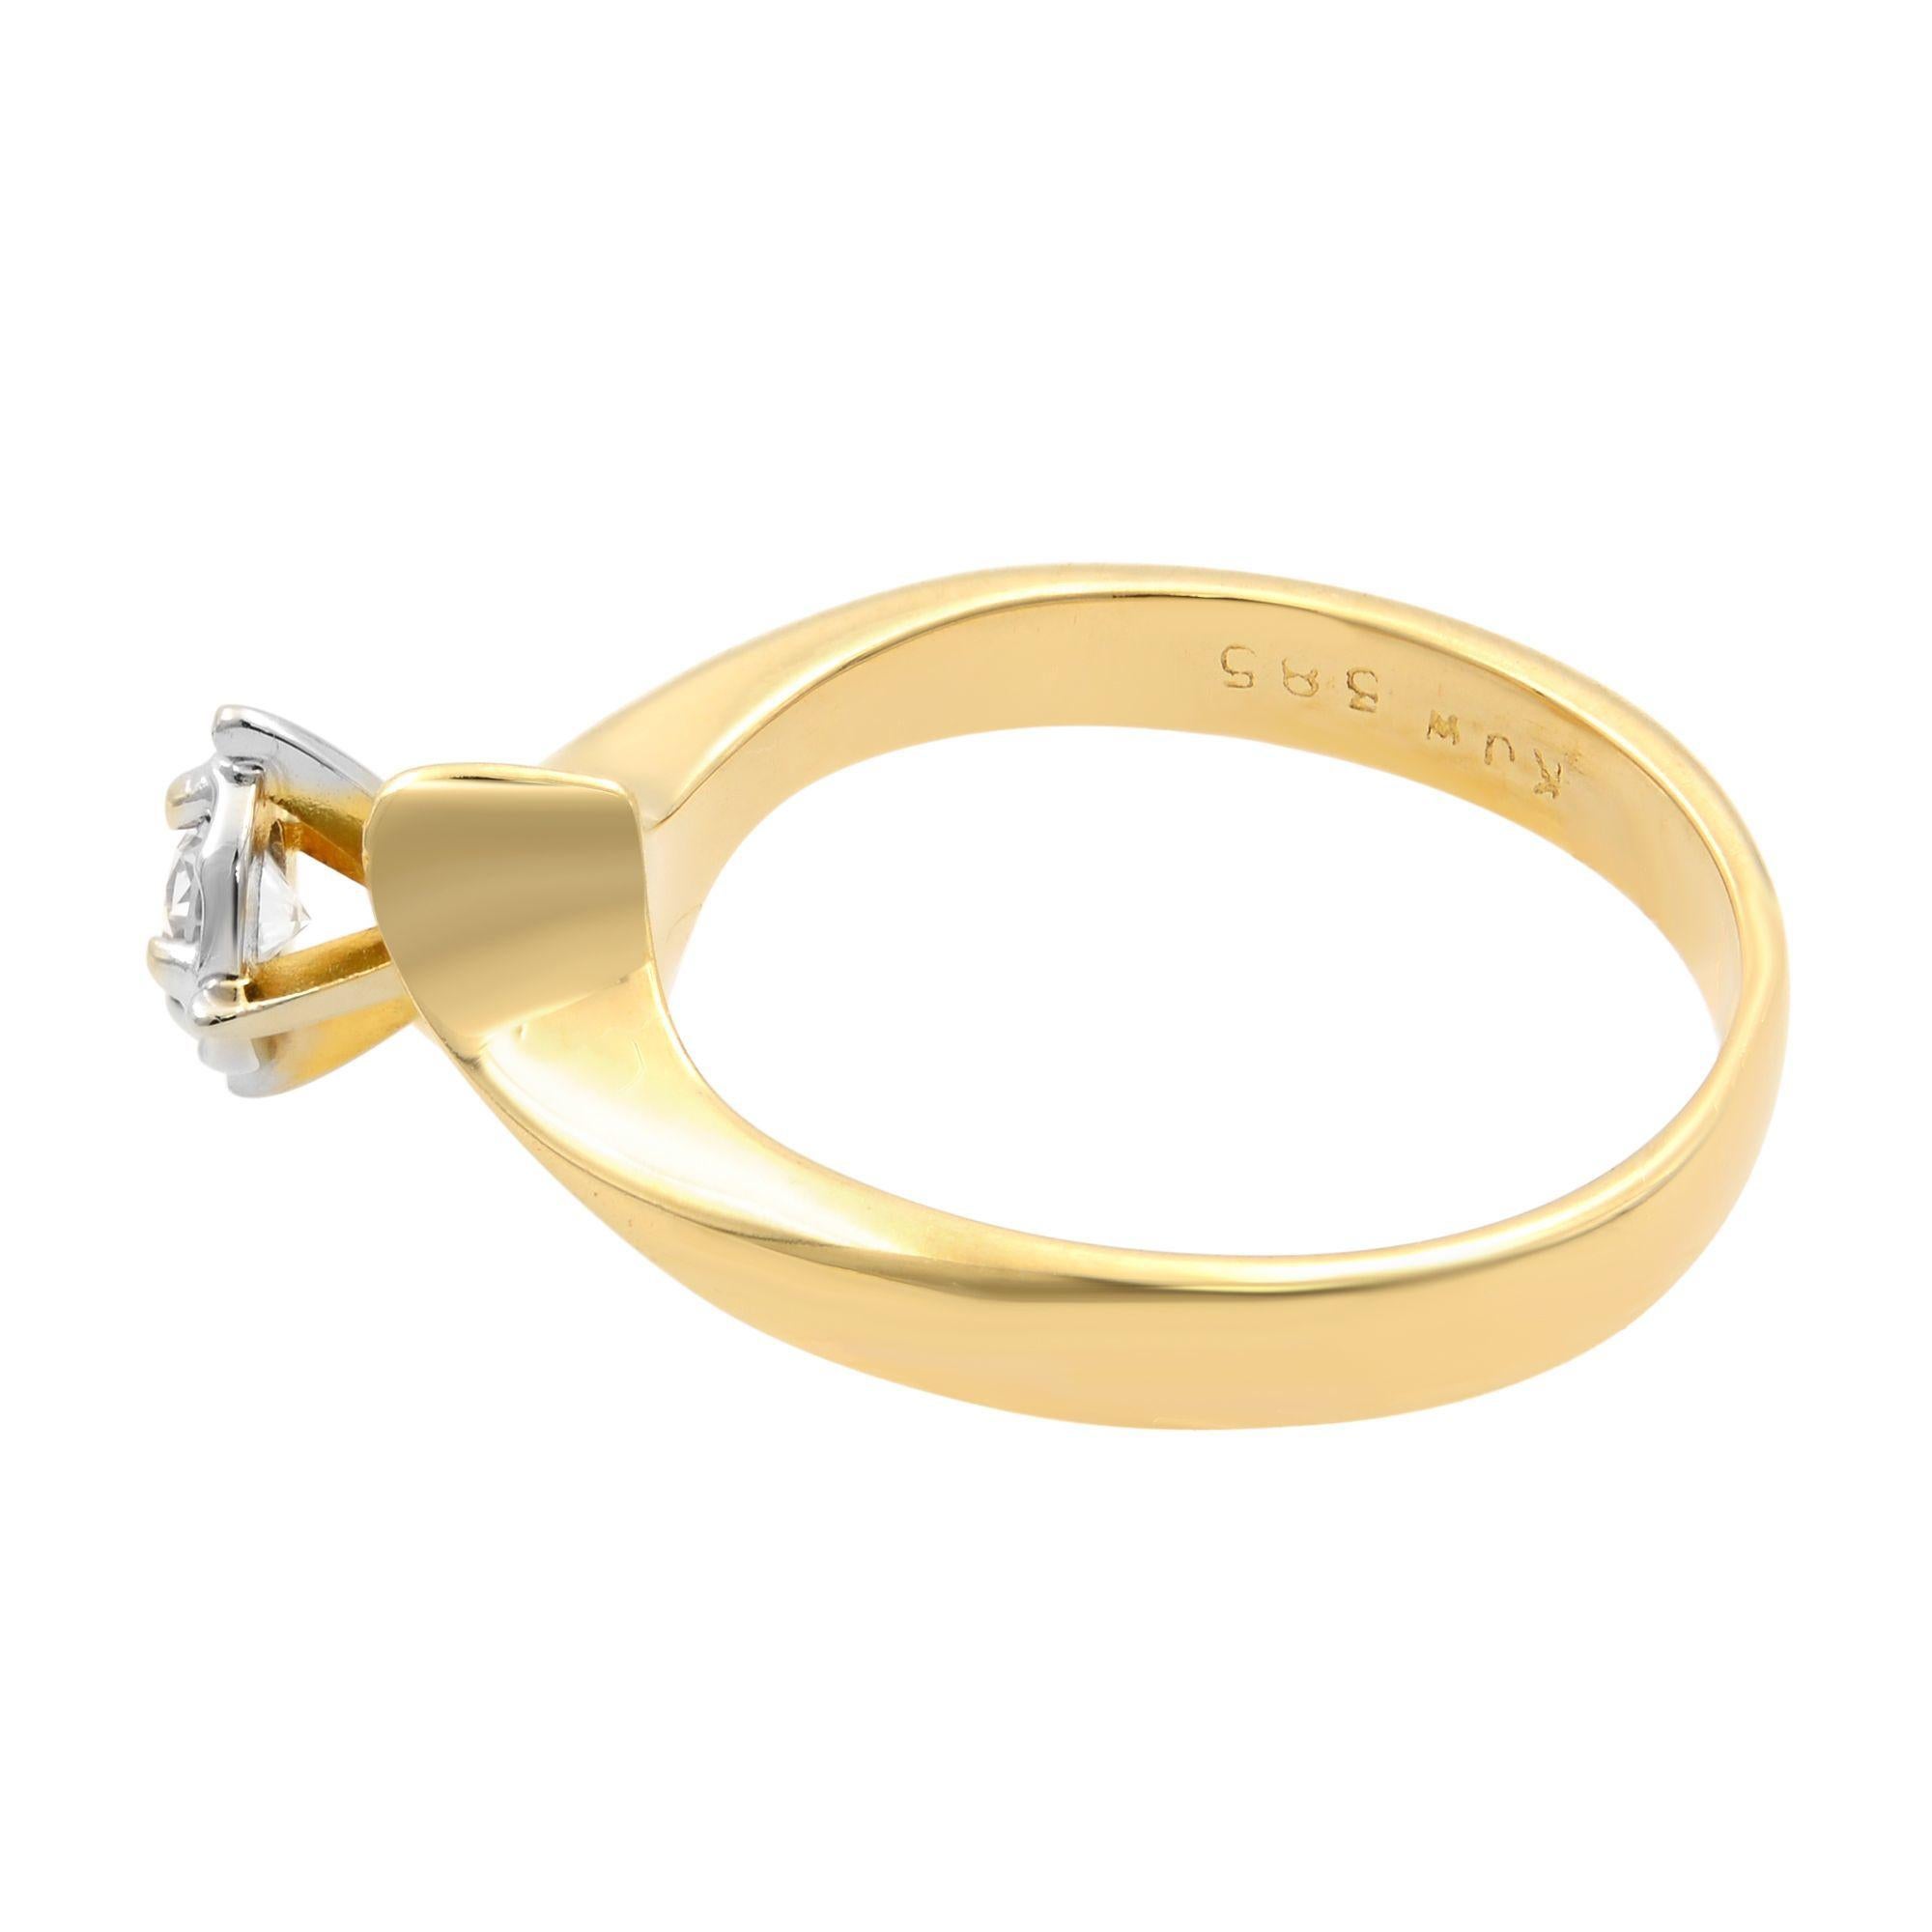 Rachel Koen Round Cut Small Diamond Engagement Ring 14K Yellow Gold 0.15cttw In New Condition For Sale In New York, NY